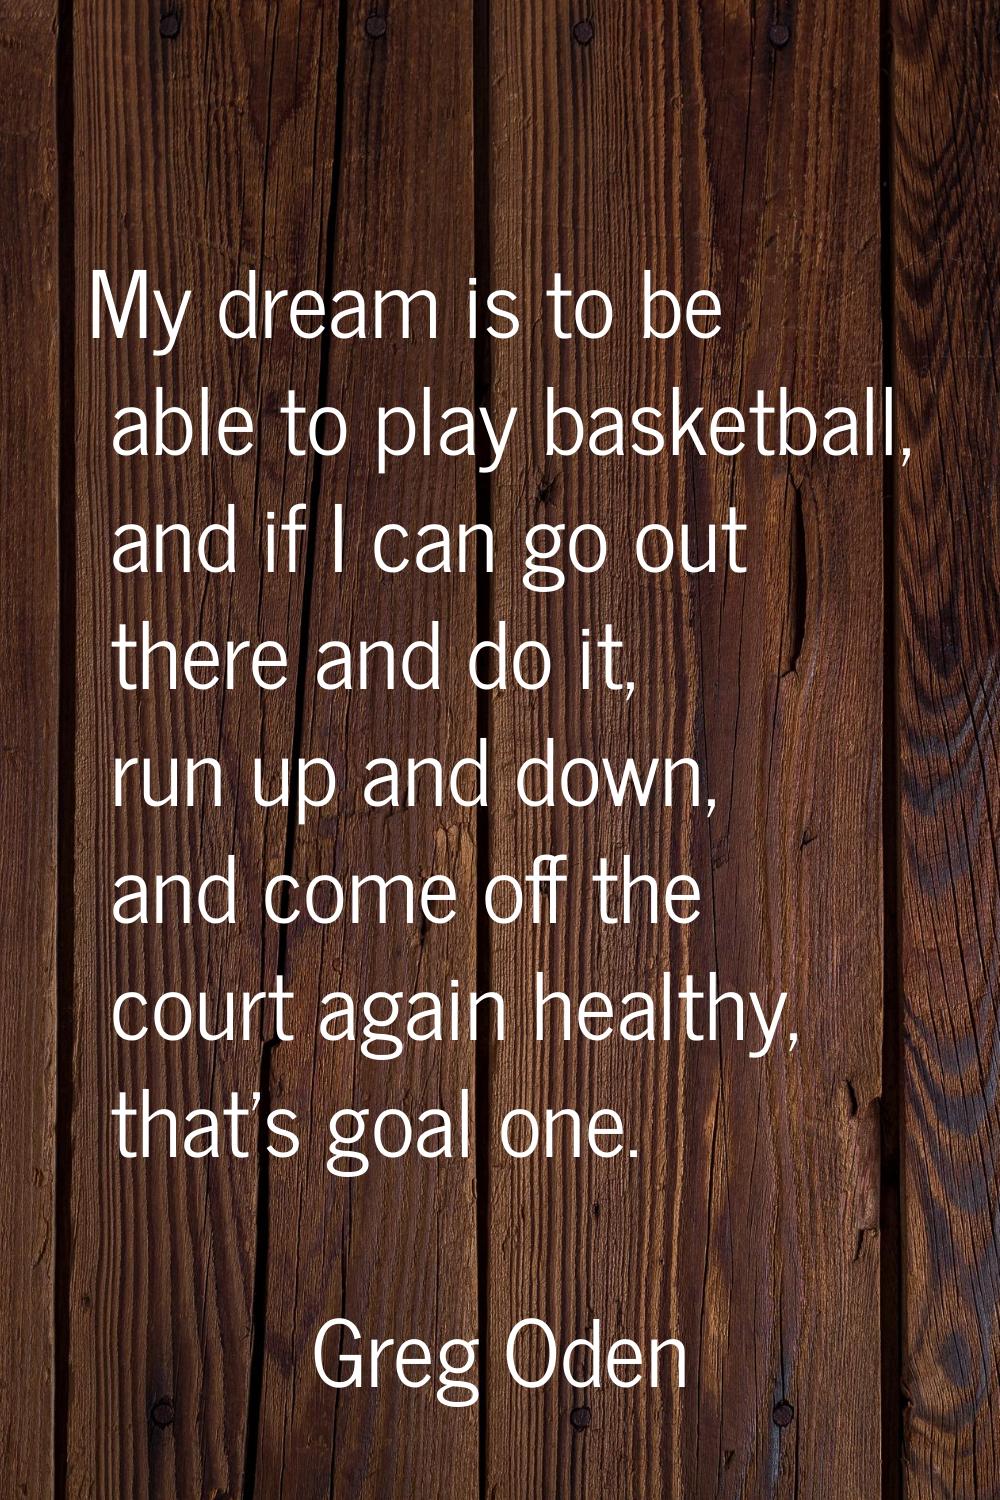 My dream is to be able to play basketball, and if I can go out there and do it, run up and down, an